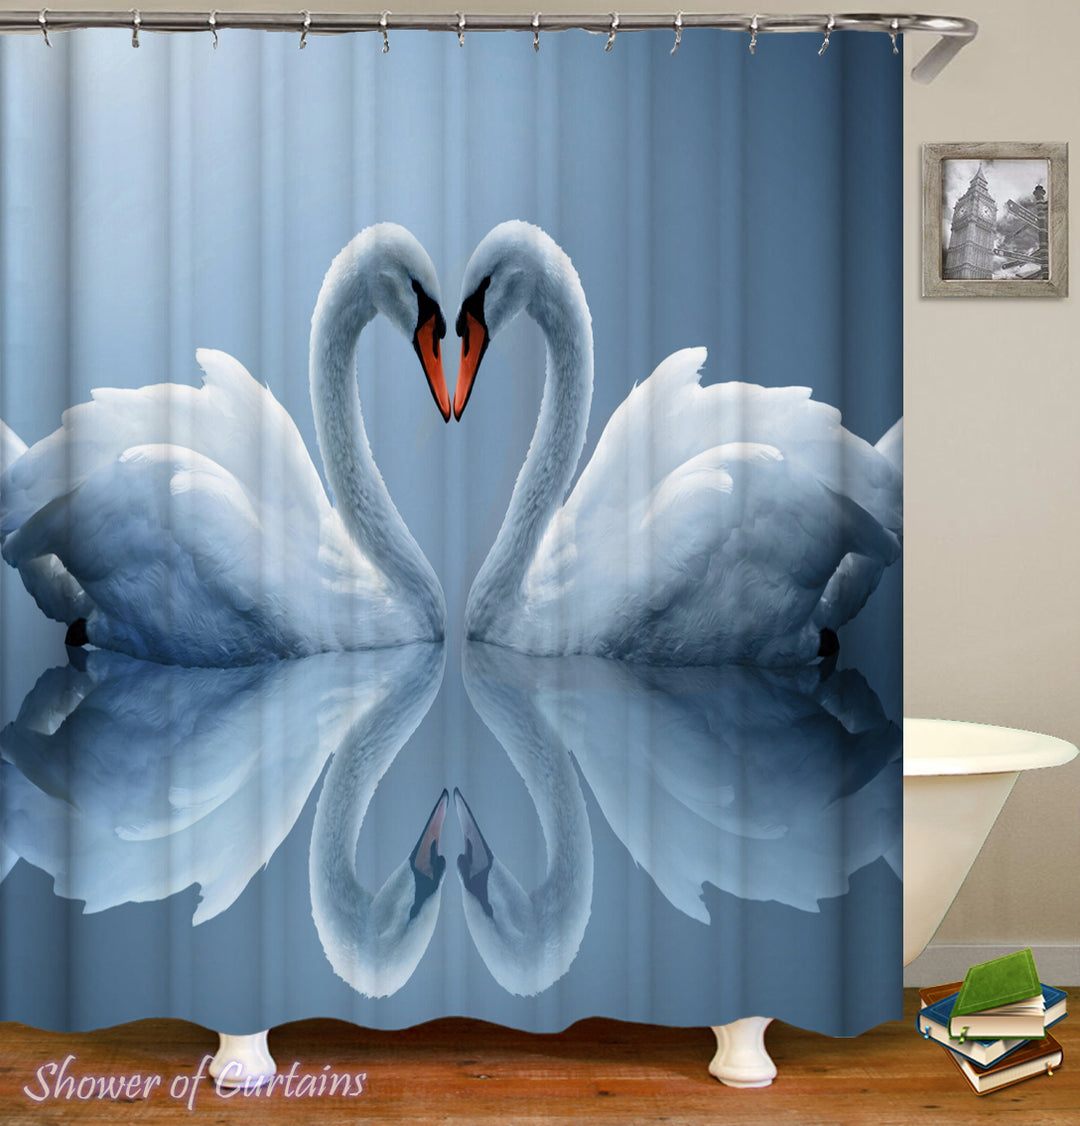 Themed shower curtains of Romantic Swans